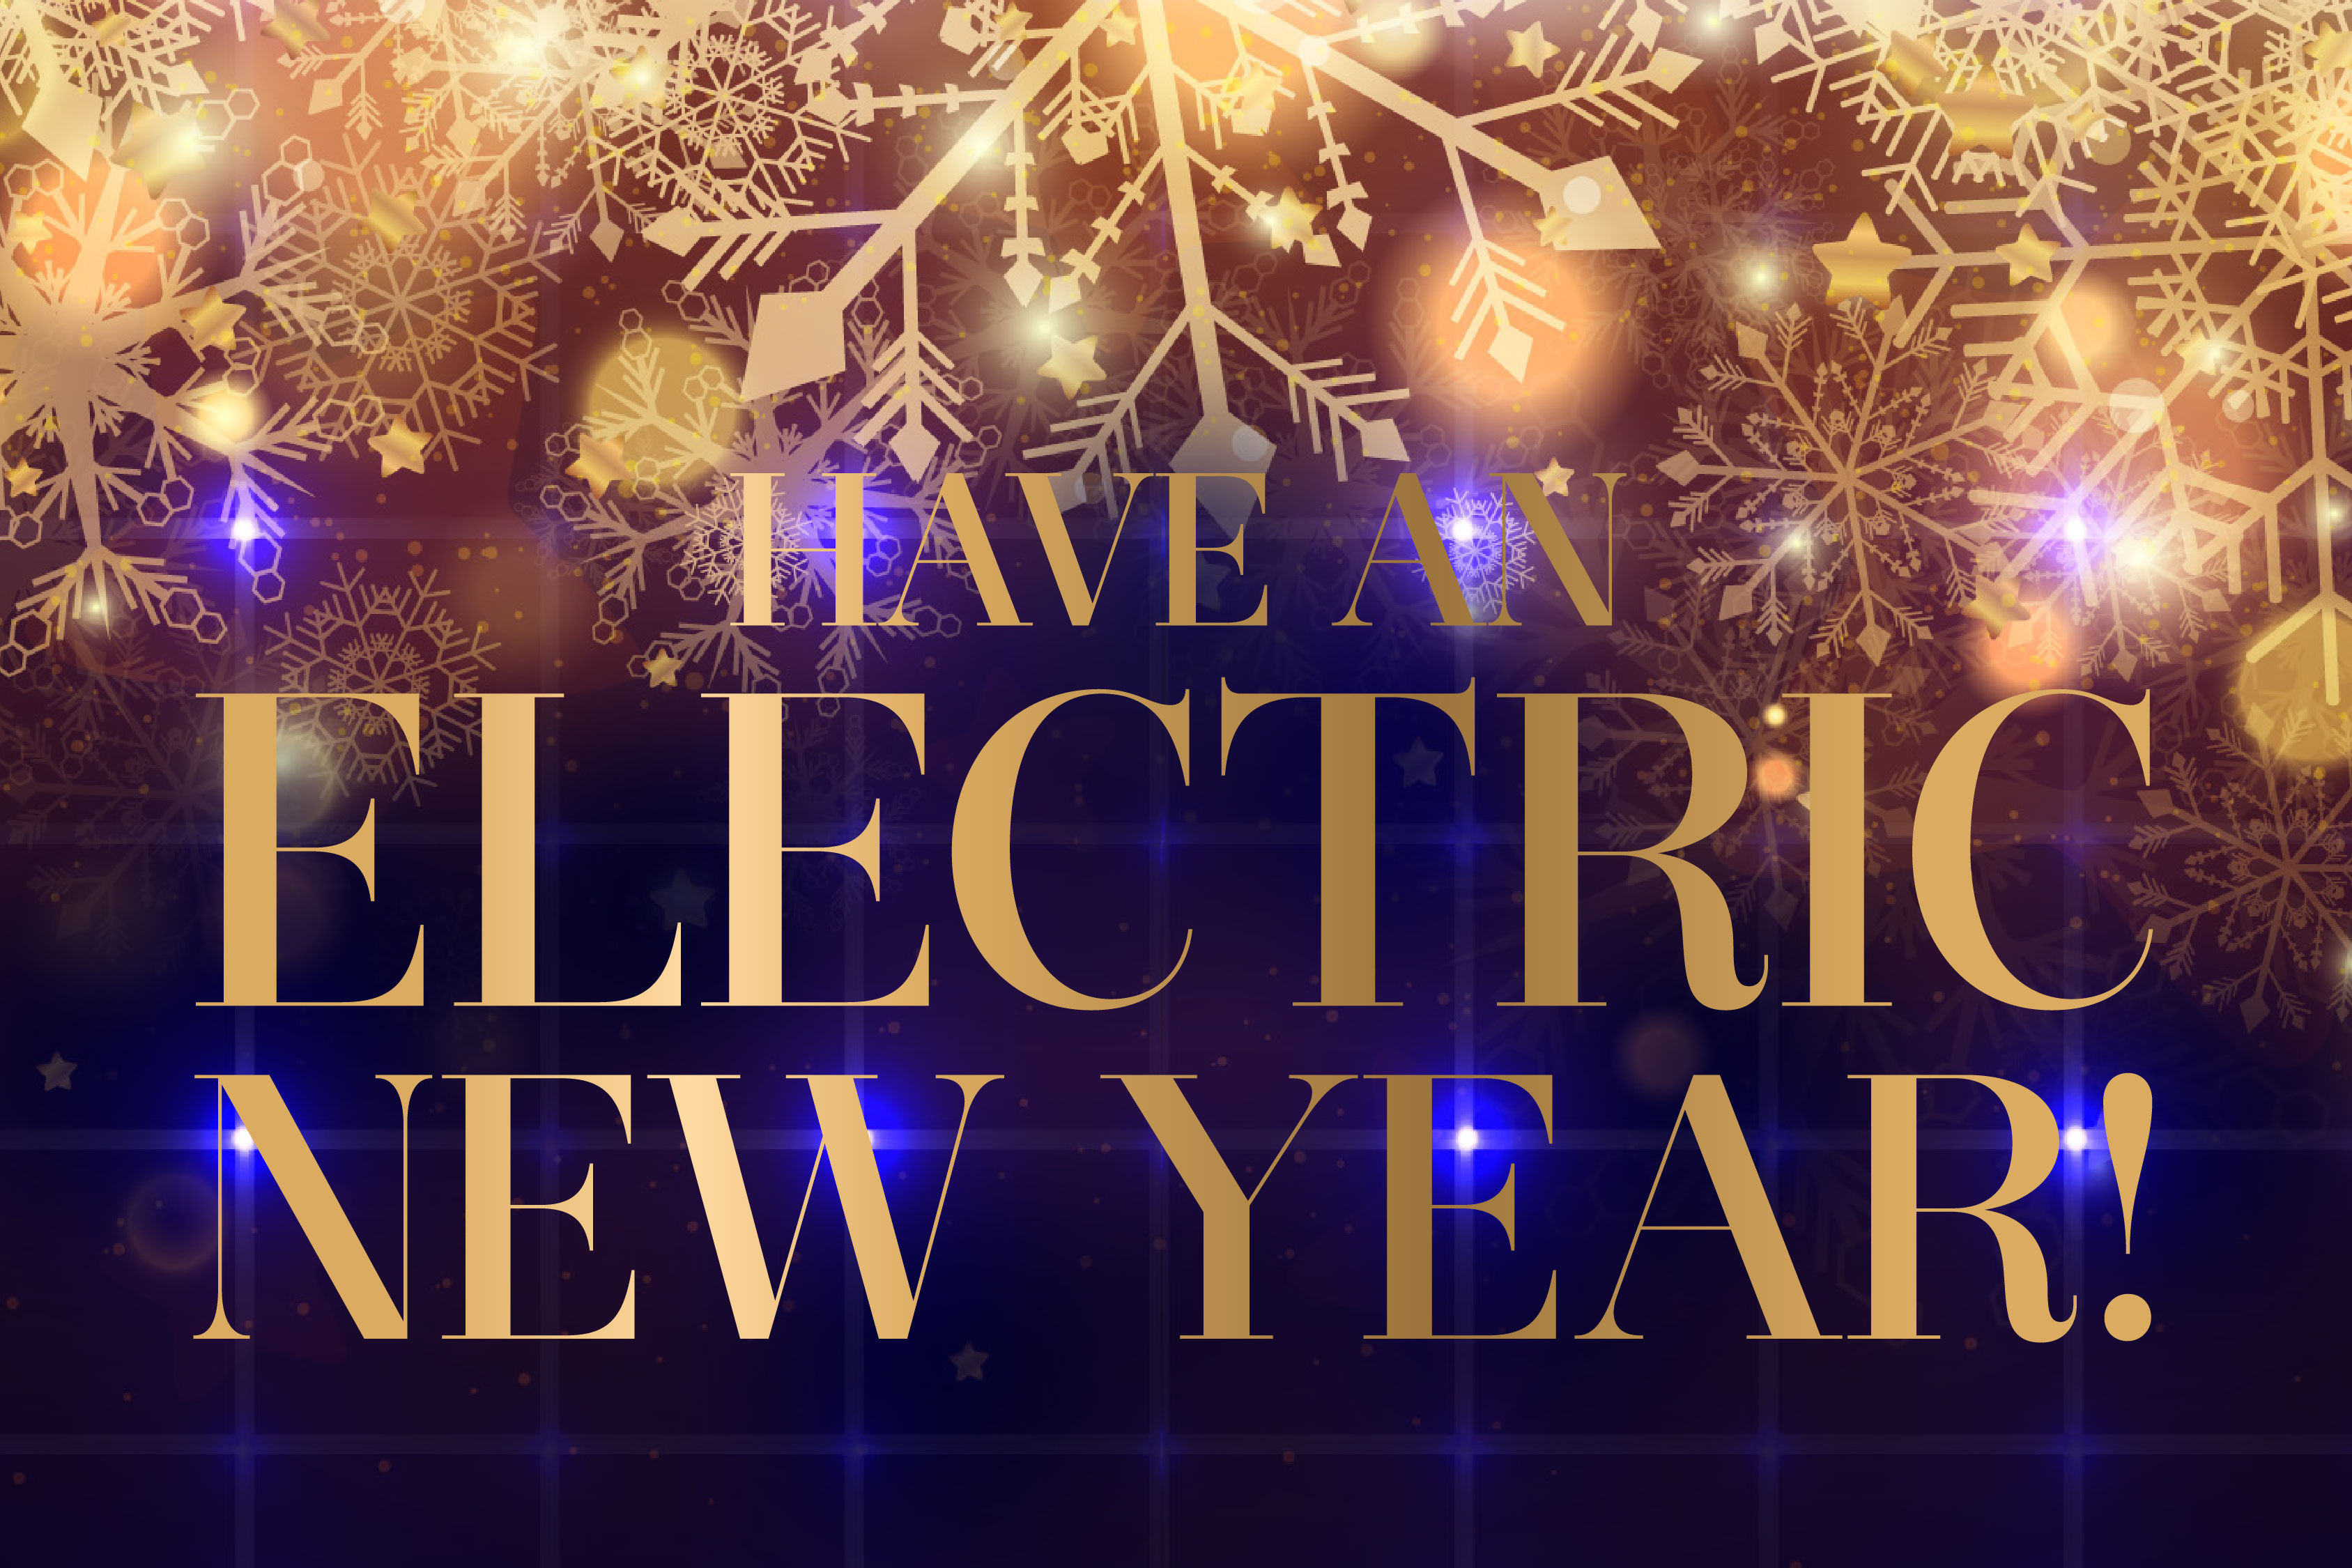 Have an Electric New Year